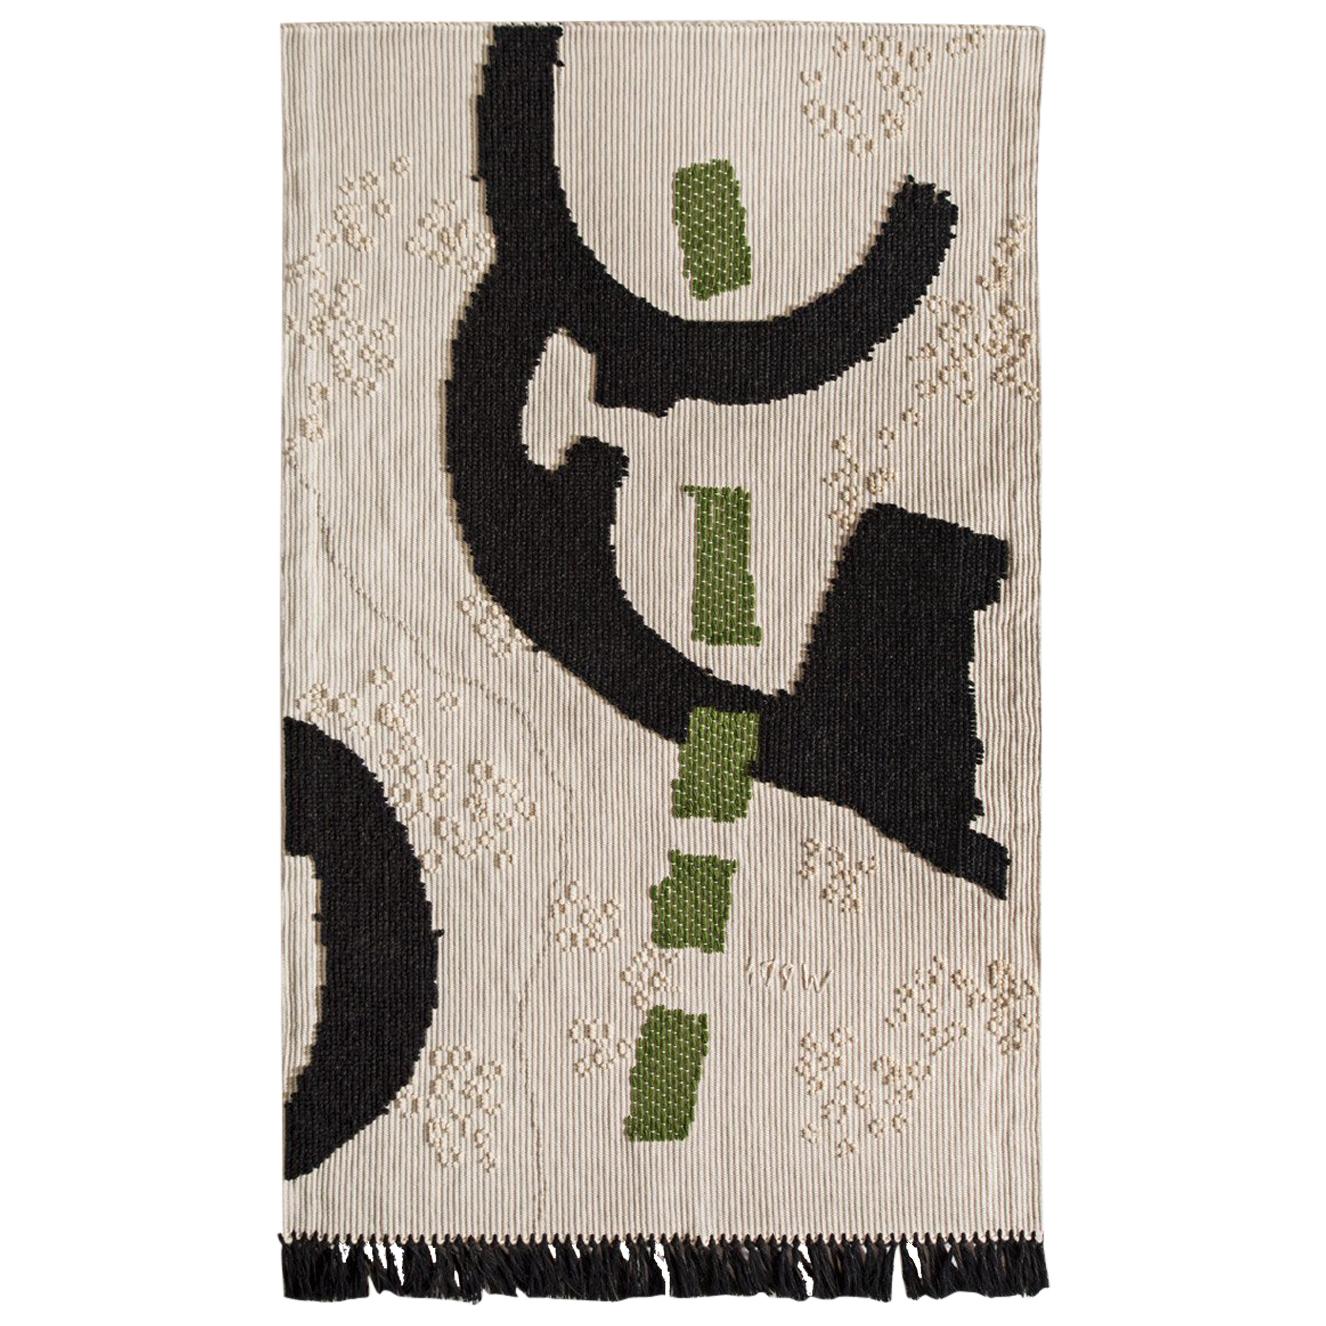 Intricately Woven Nuragic Satellitaria Tapestry by Roberto Sironi in Cream For Sale